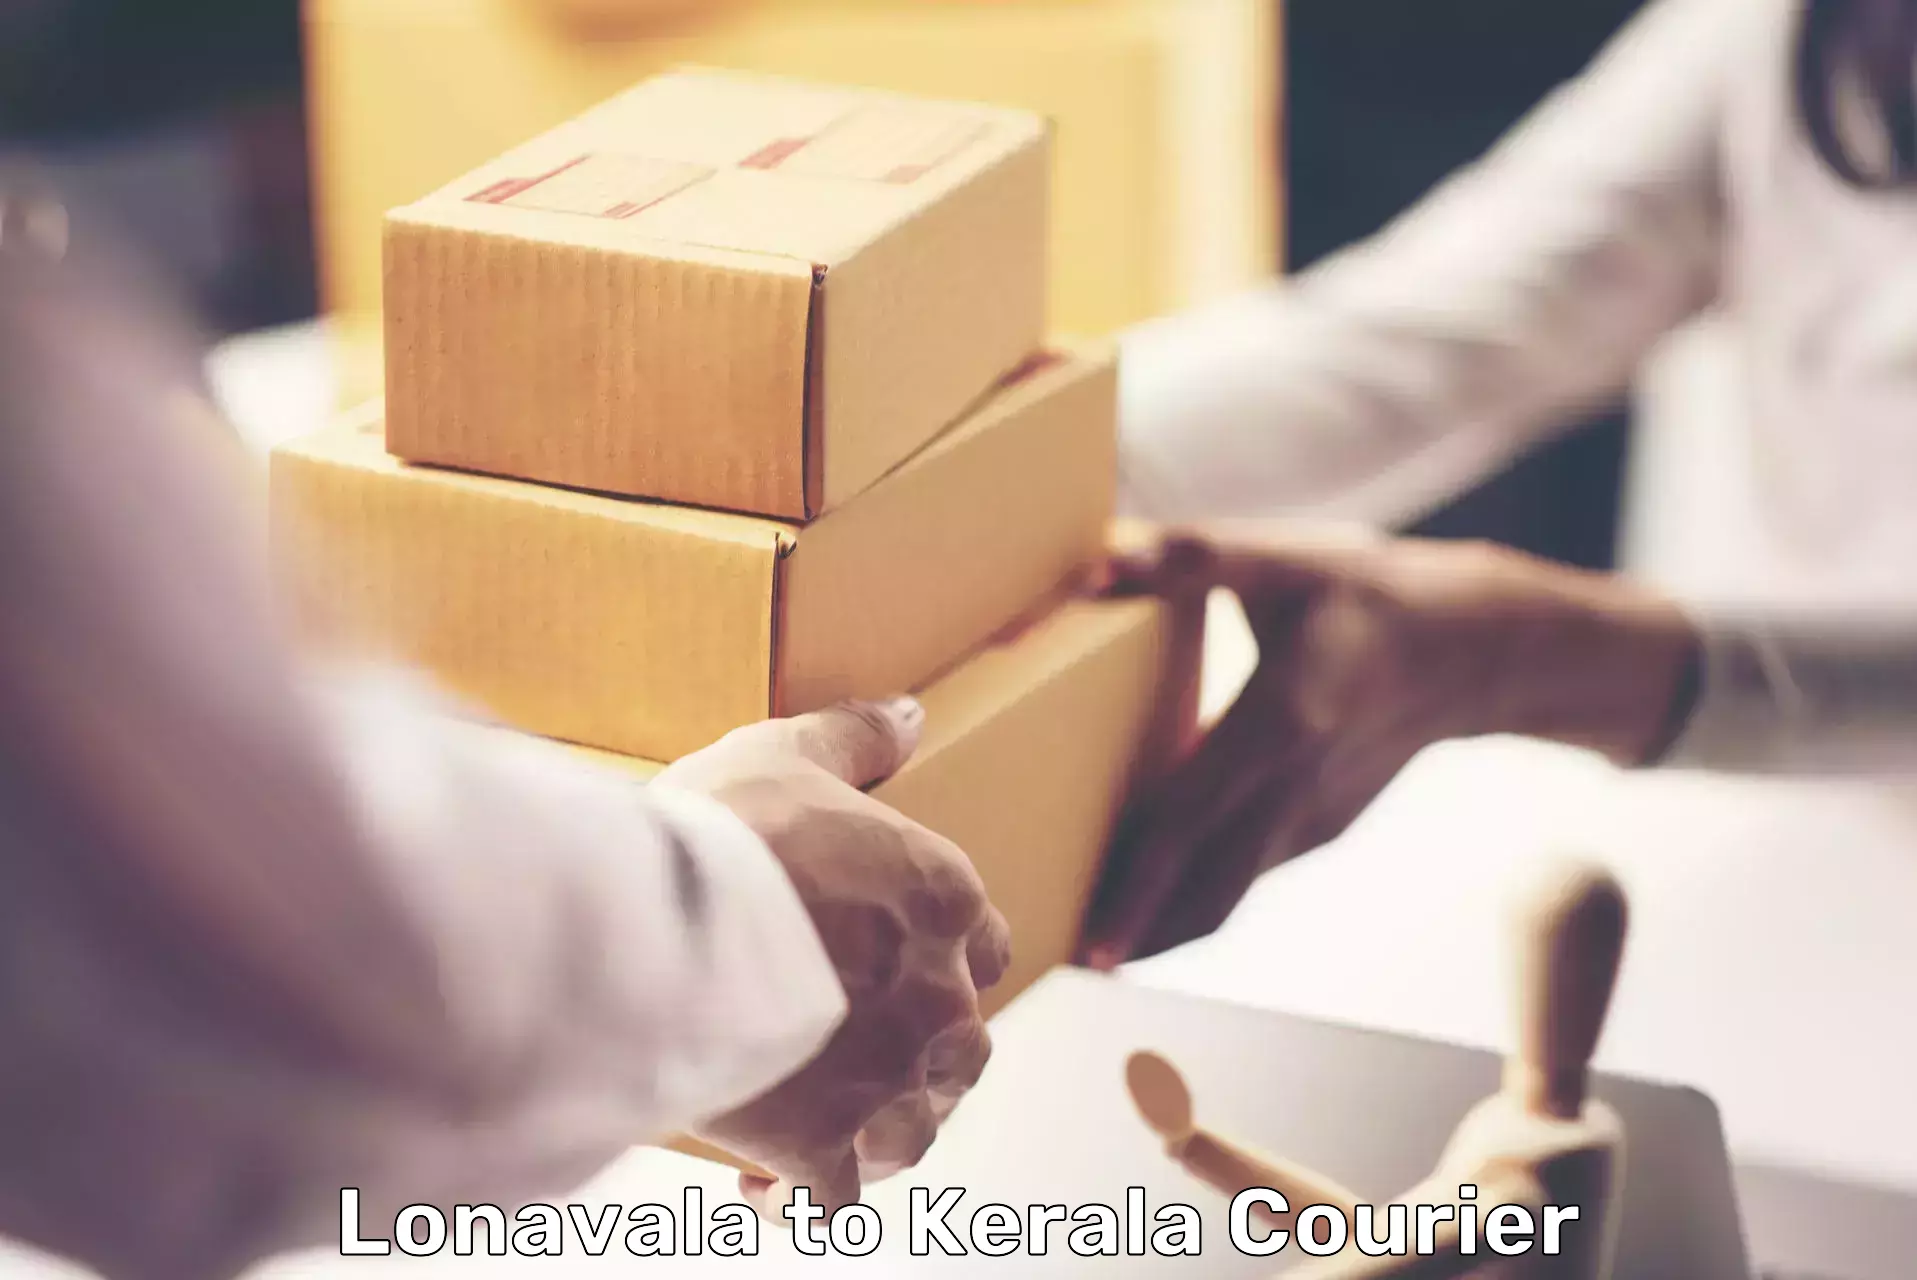 Global logistics network Lonavala to Cochin University of Science and Technology